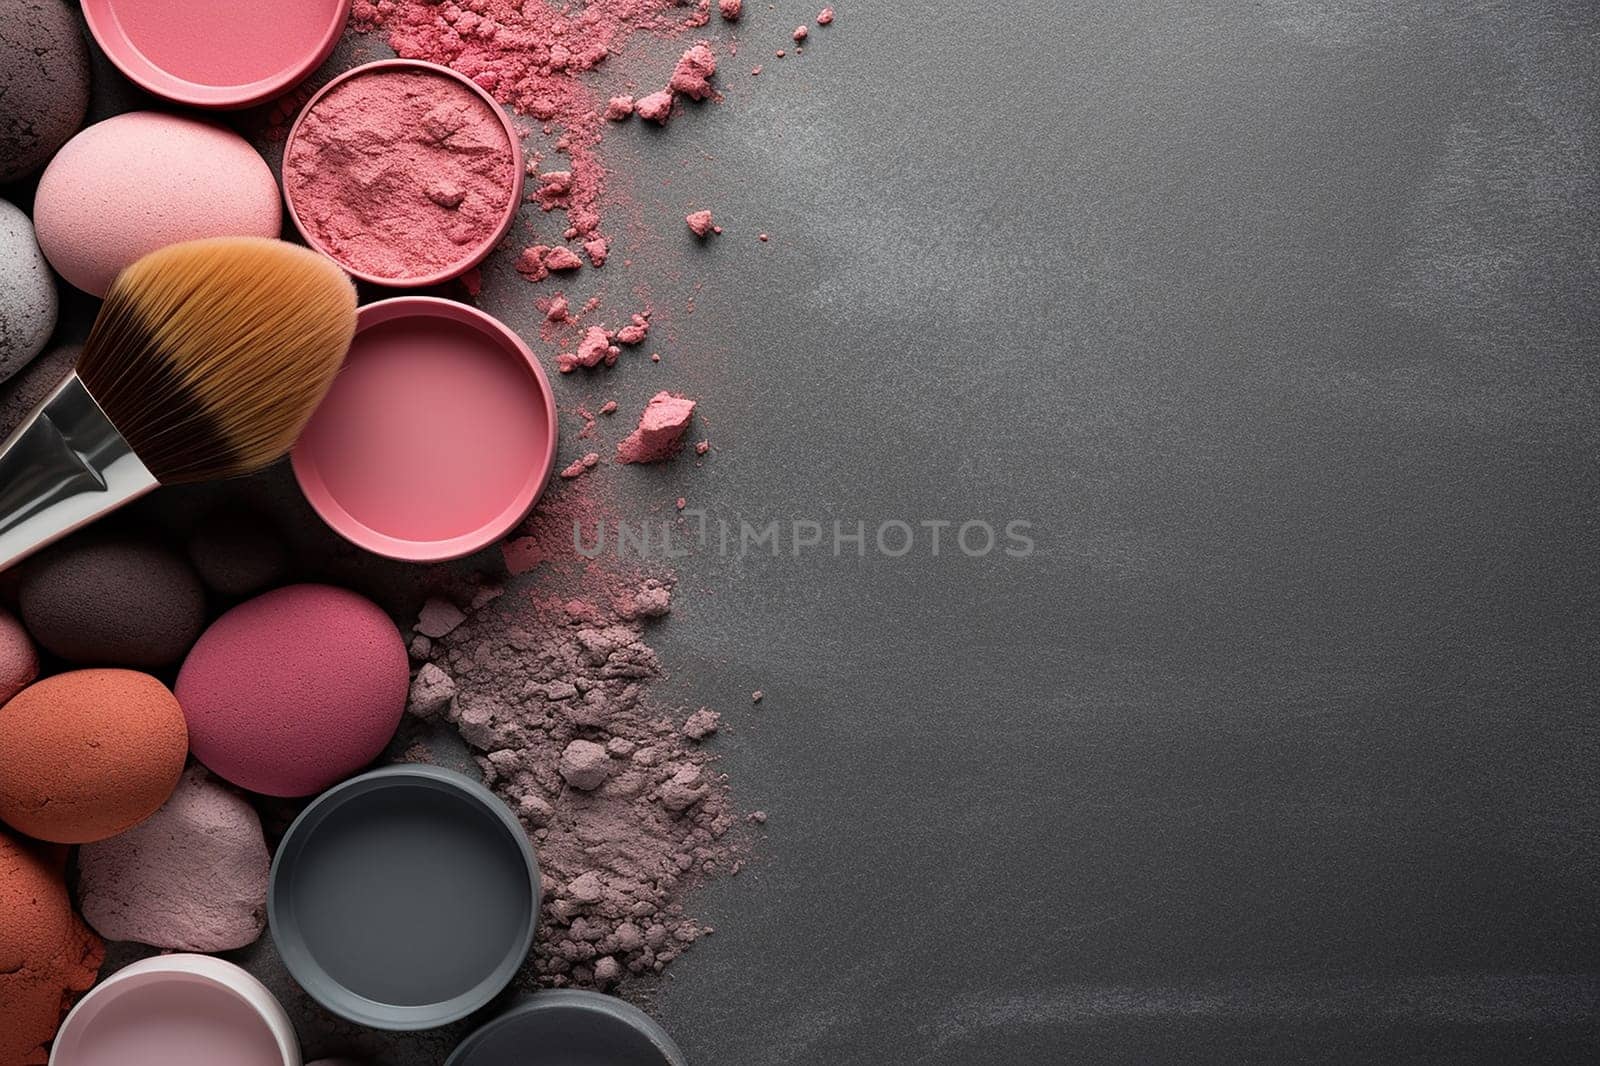 Various makeup products artistically displayed on dark background.